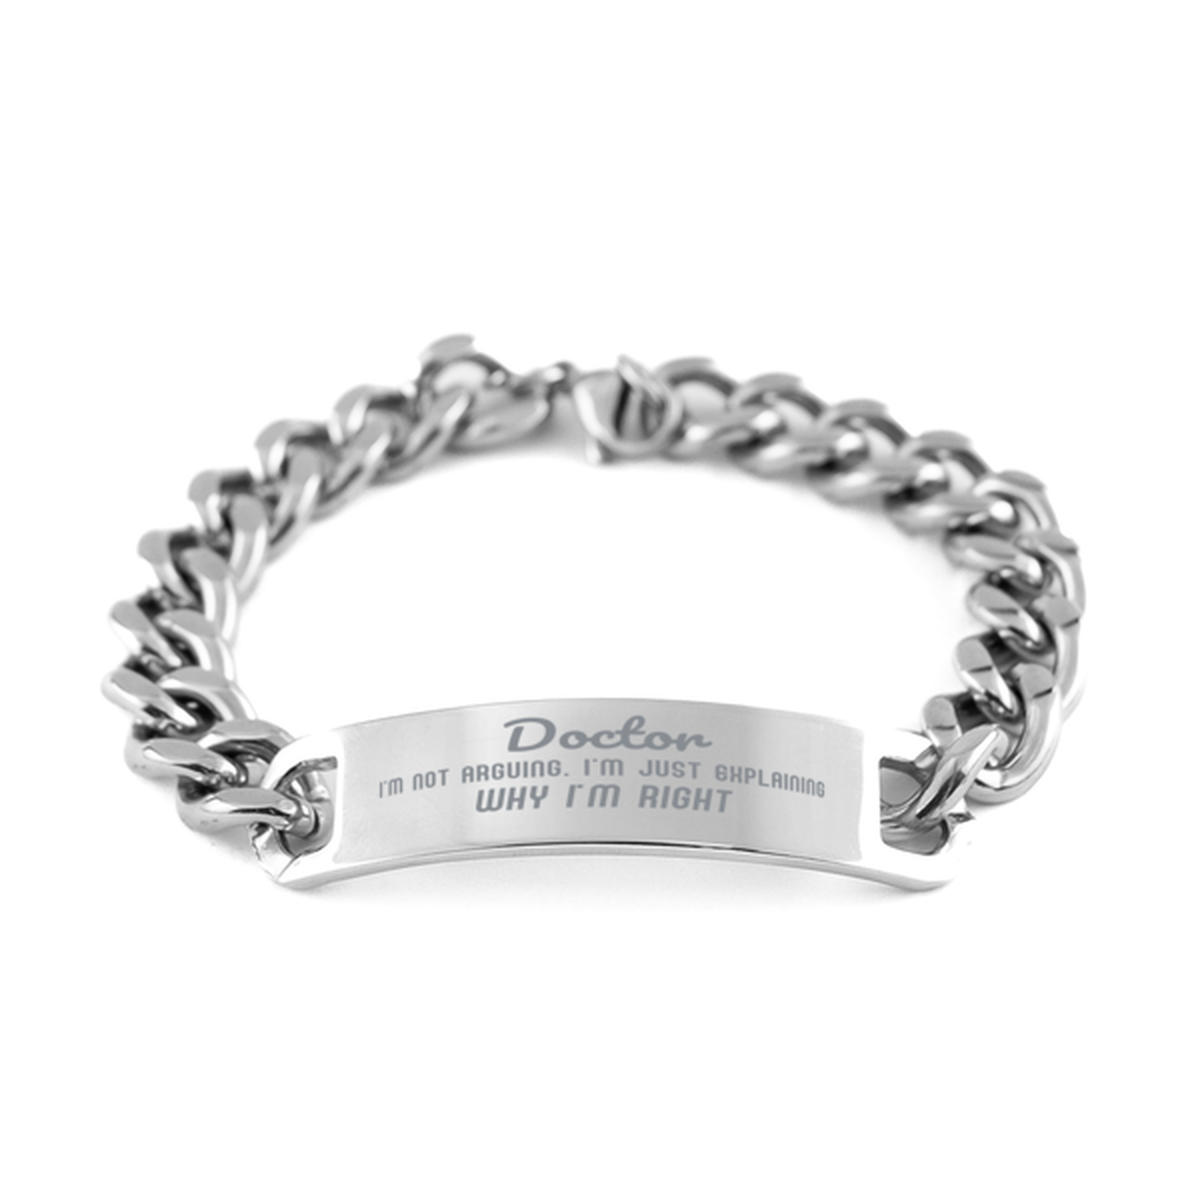 Doctor I'm not Arguing. I'm Just Explaining Why I'm RIGHT Cuban Chain Stainless Steel Bracelet, Graduation Birthday Christmas Doctor Gifts For Doctor Funny Saying Quote Present for Men Women Coworker